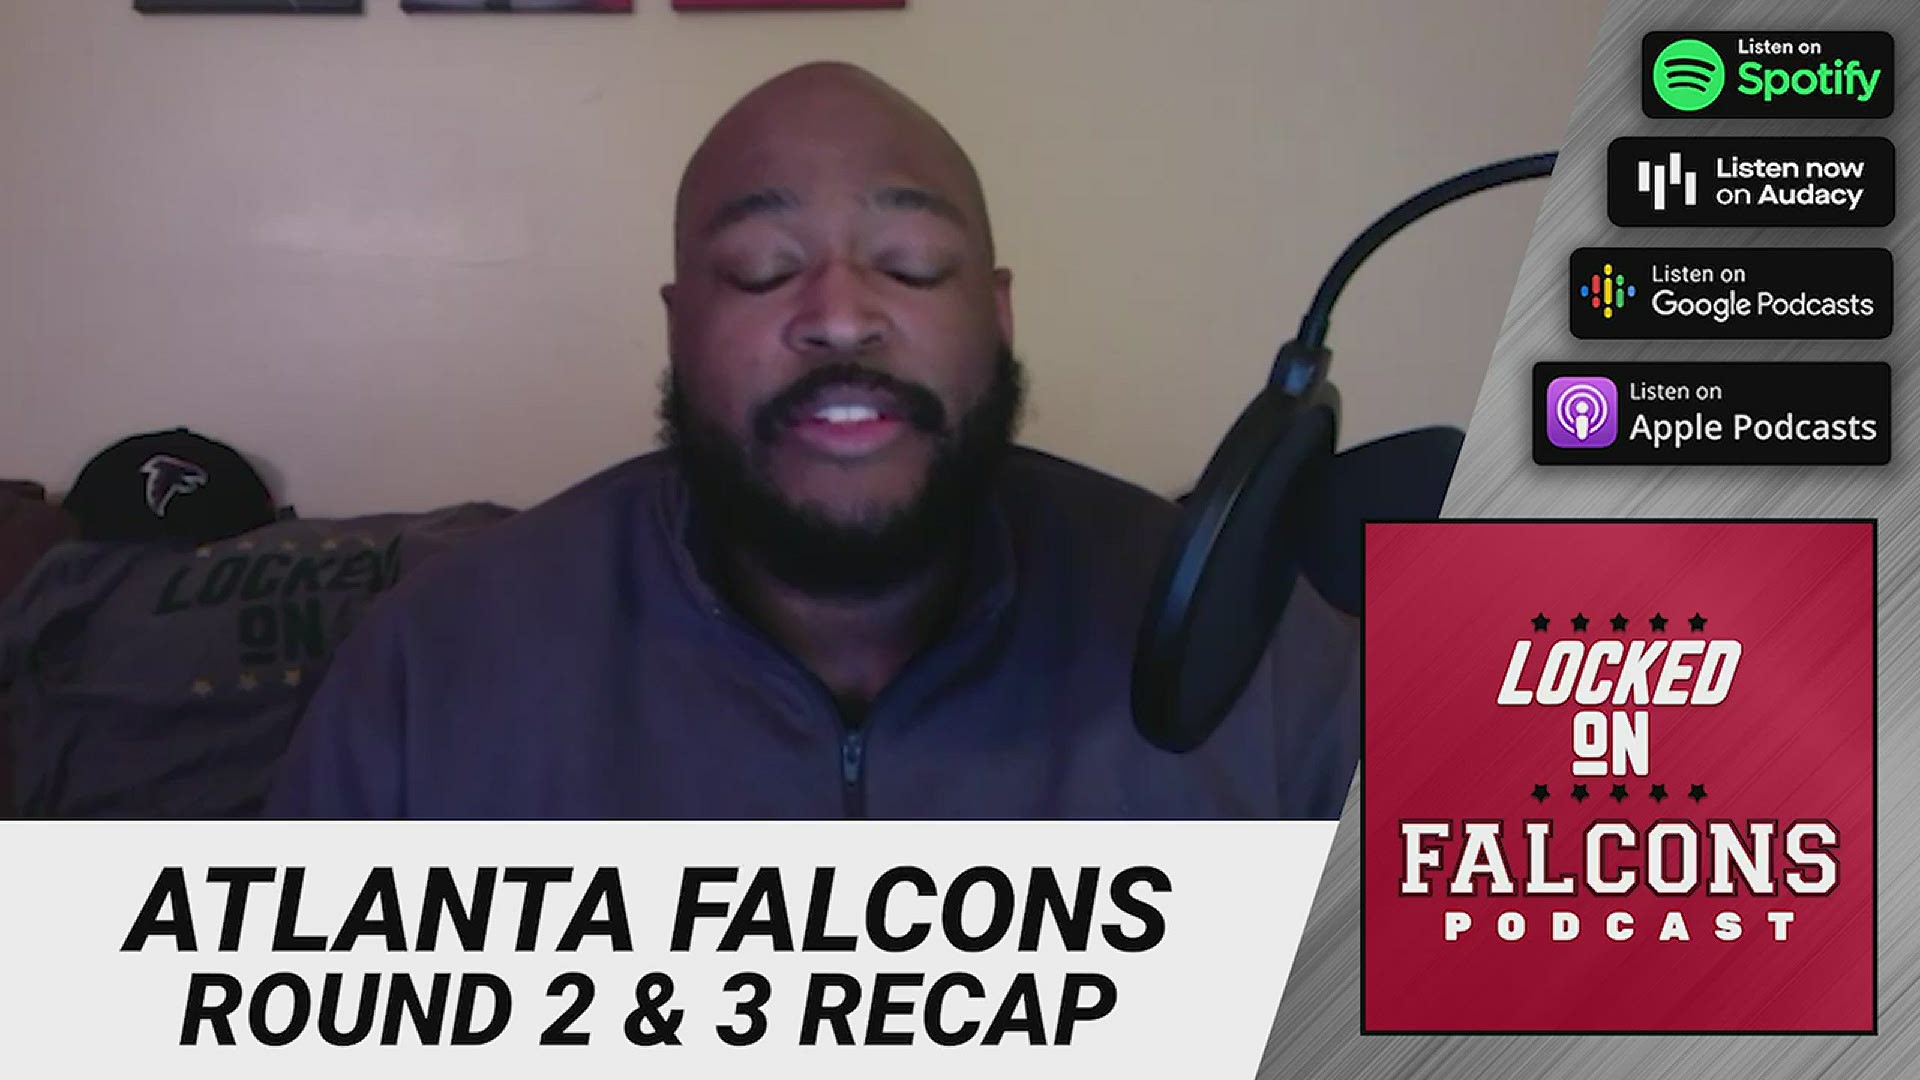 The host of the Locked On Falcons podcast reacts to the teams second and third rounds of the NFL Draft.